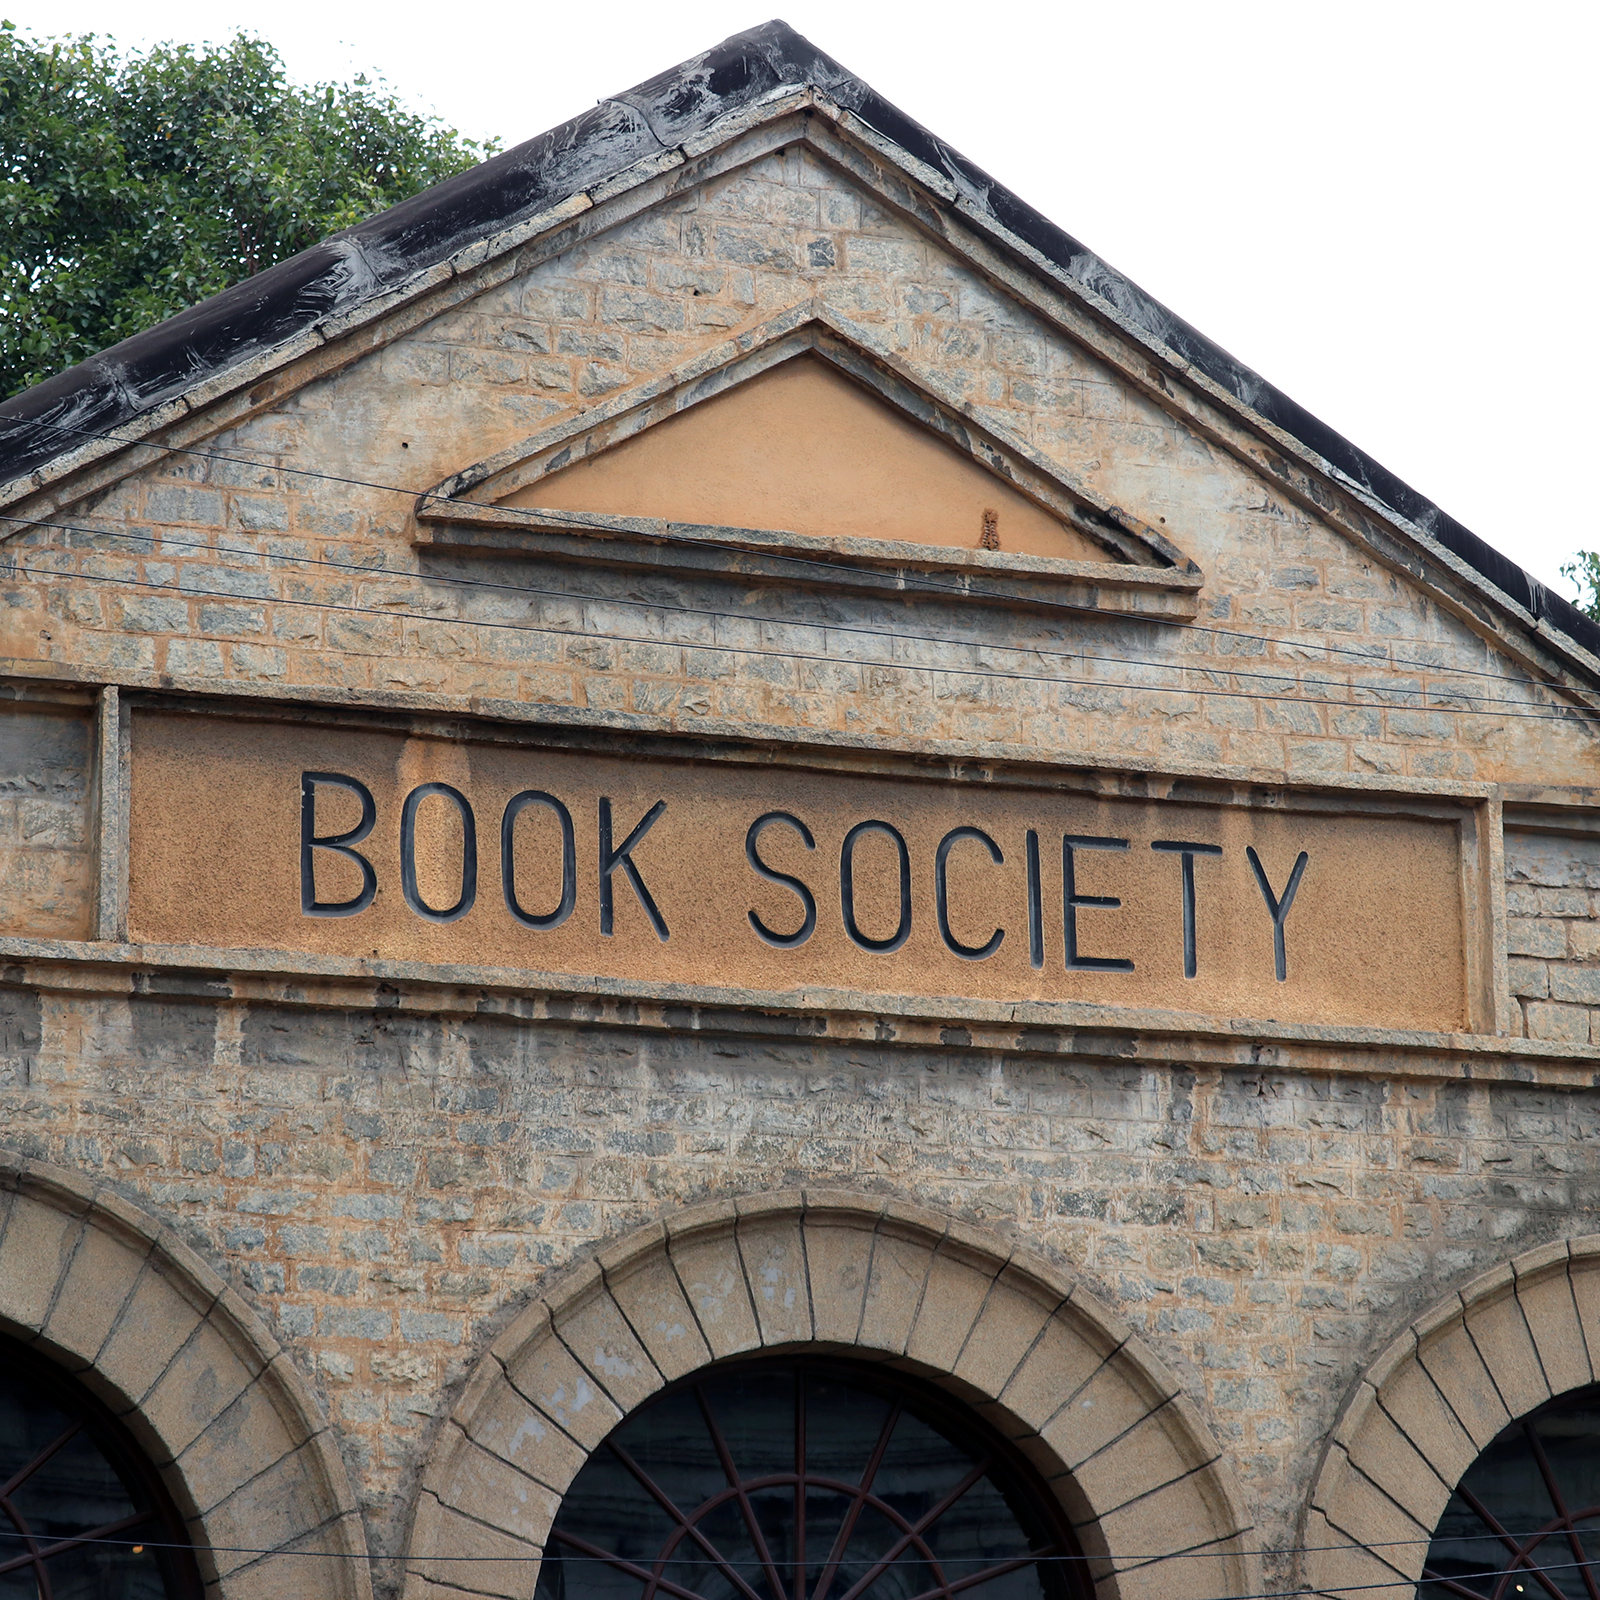 Tract and Book Society Building